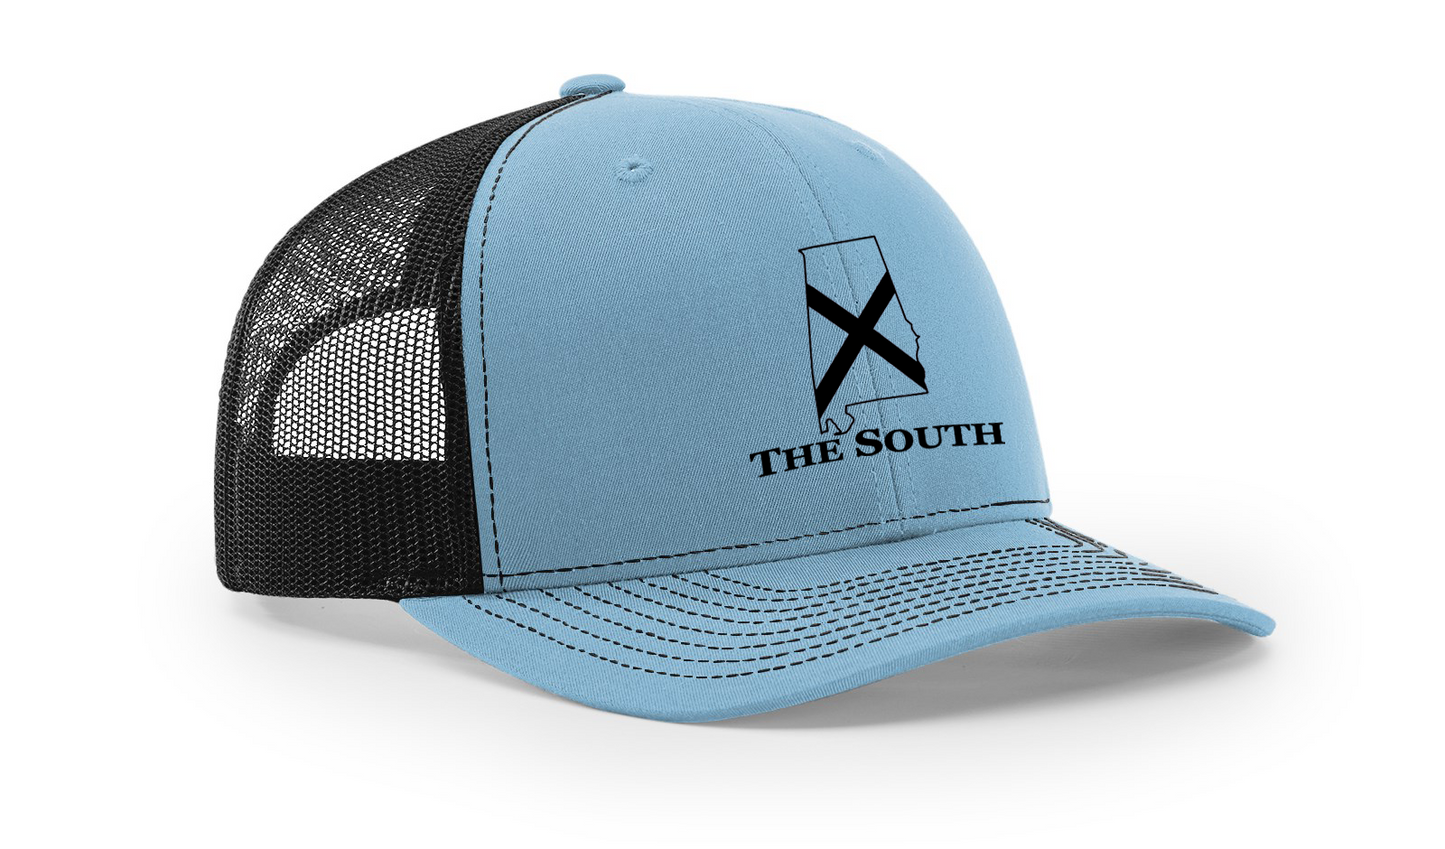 Columbia Blue/Black - The South